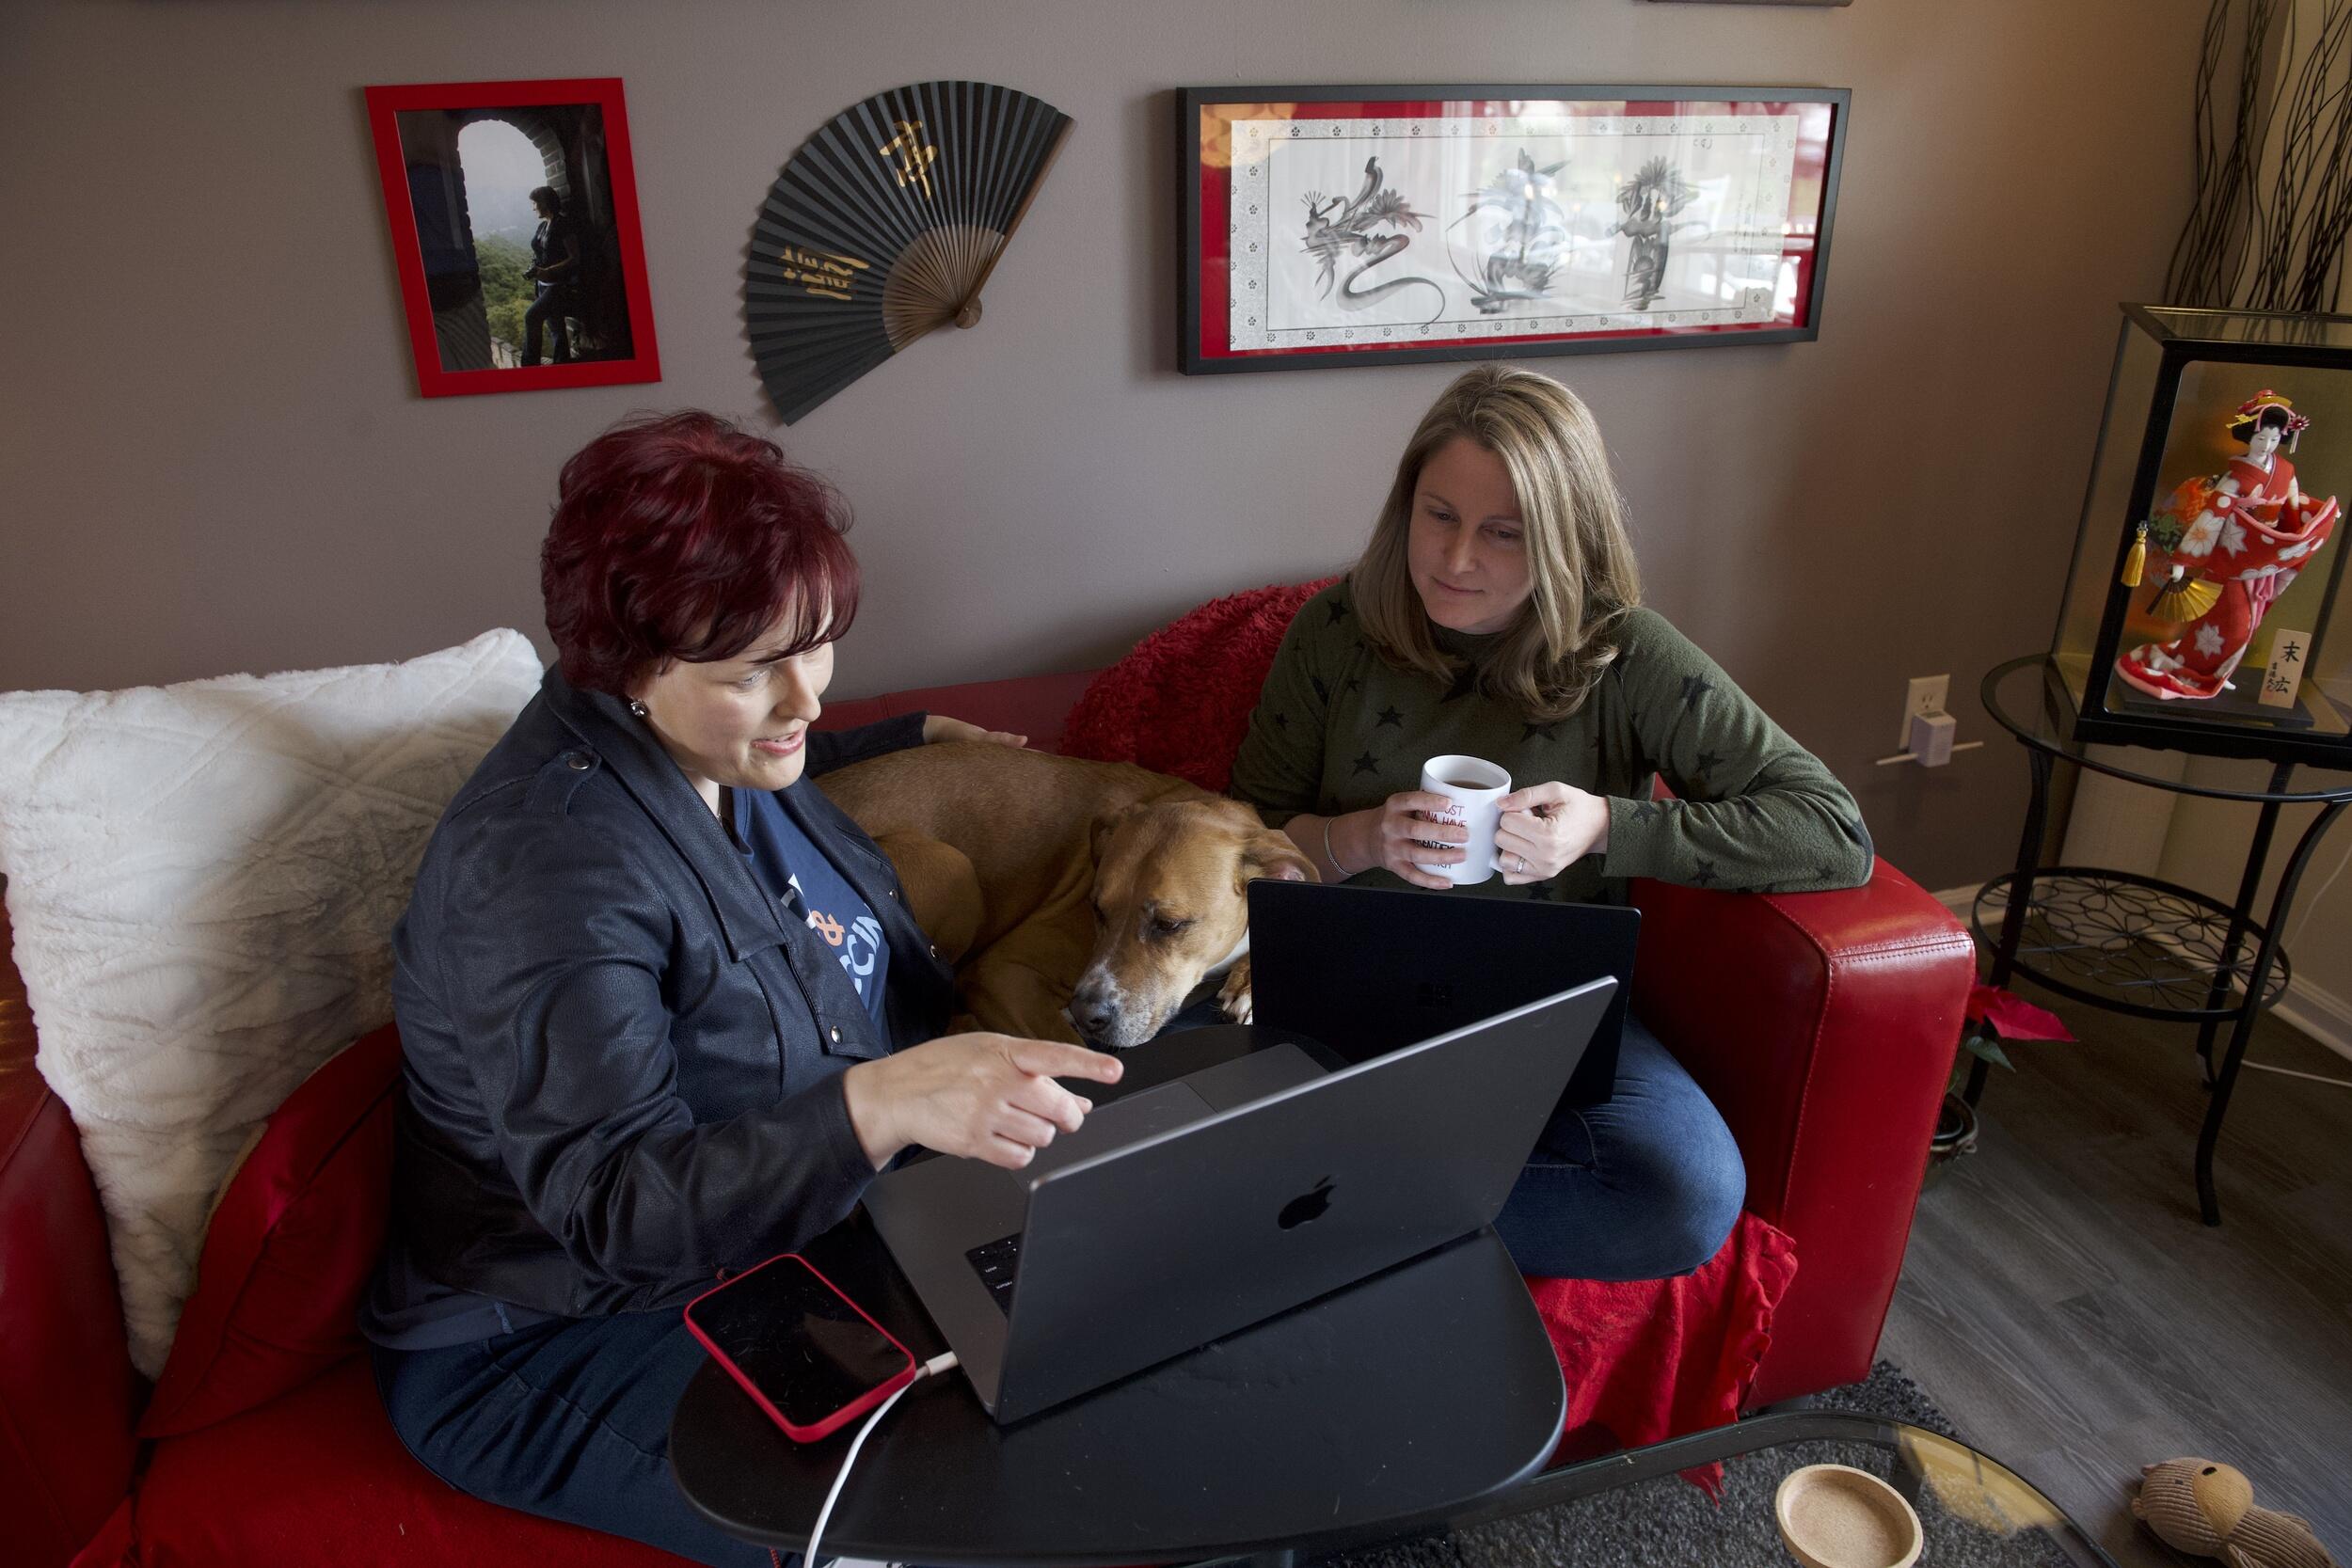 Two women sitting on a couch with a dog in between them. The woman on the right is holding a cup of coffee and the one of the left has a laptop in front of her that she is pointing at. Both women are looking at the laptop 